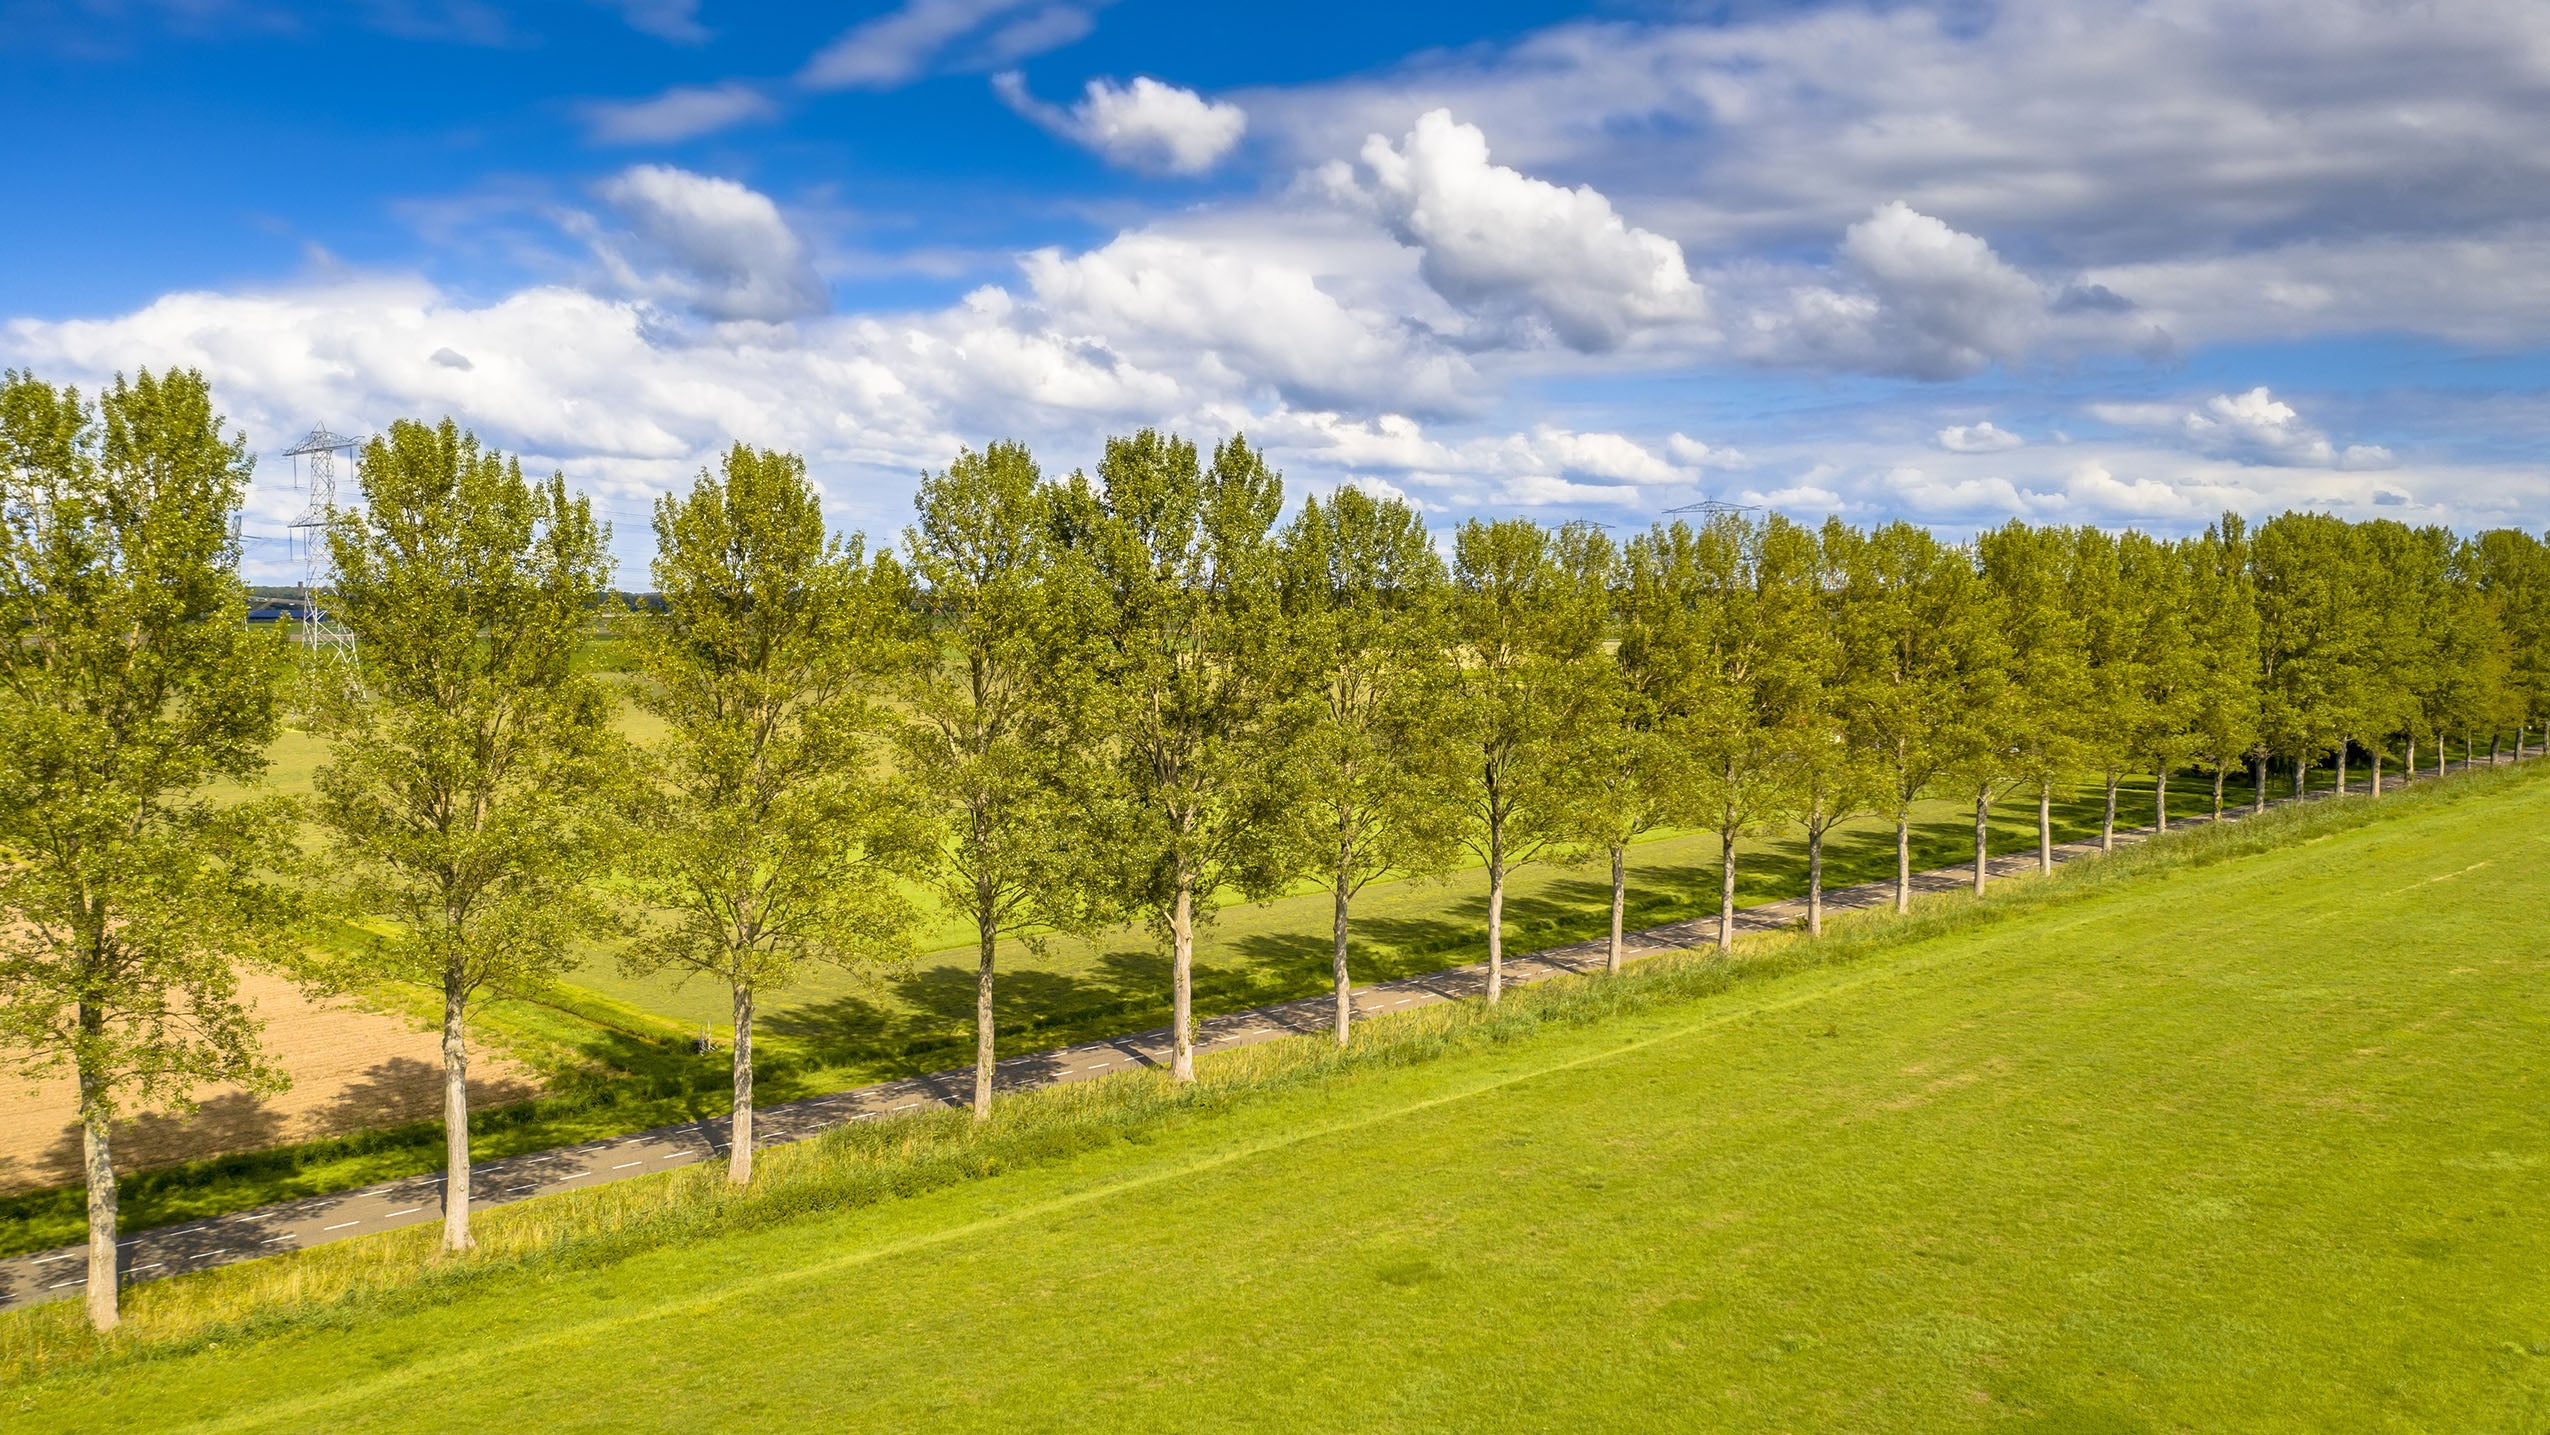 A line of trees with a blue sky in the background